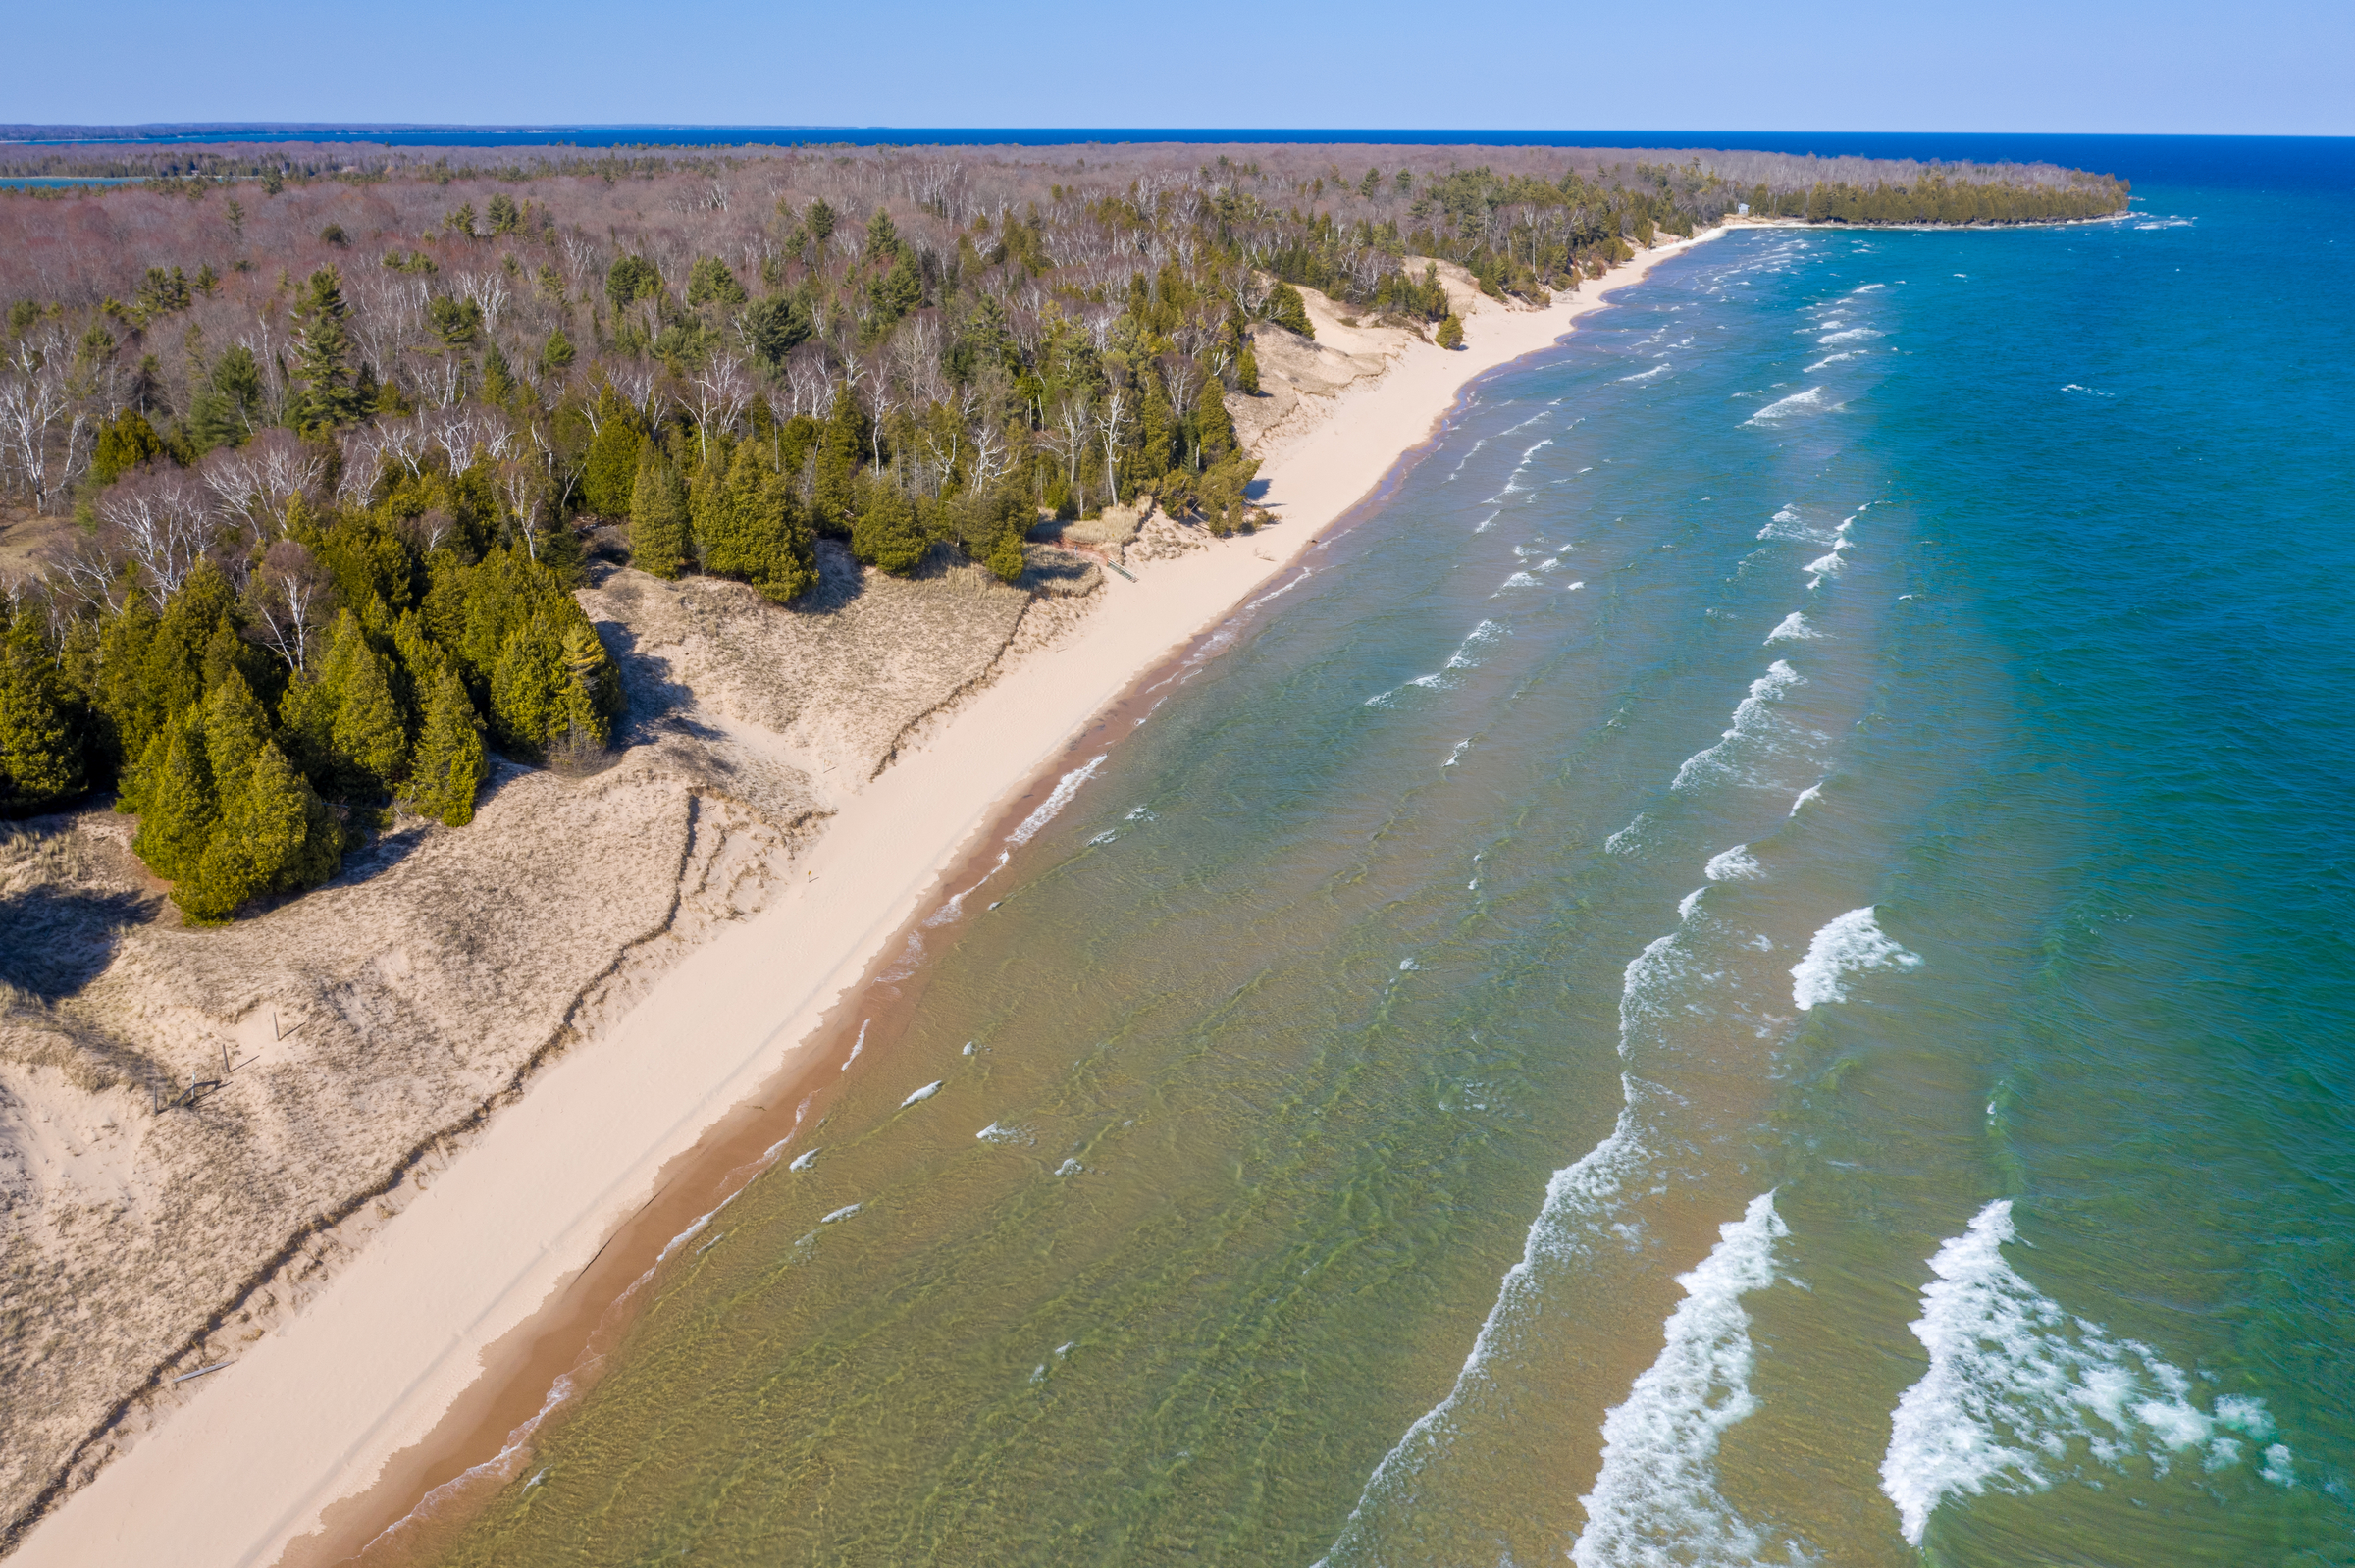 Whitefish Dunes State Park in Door County, Wis., is seen on April 4, 2021